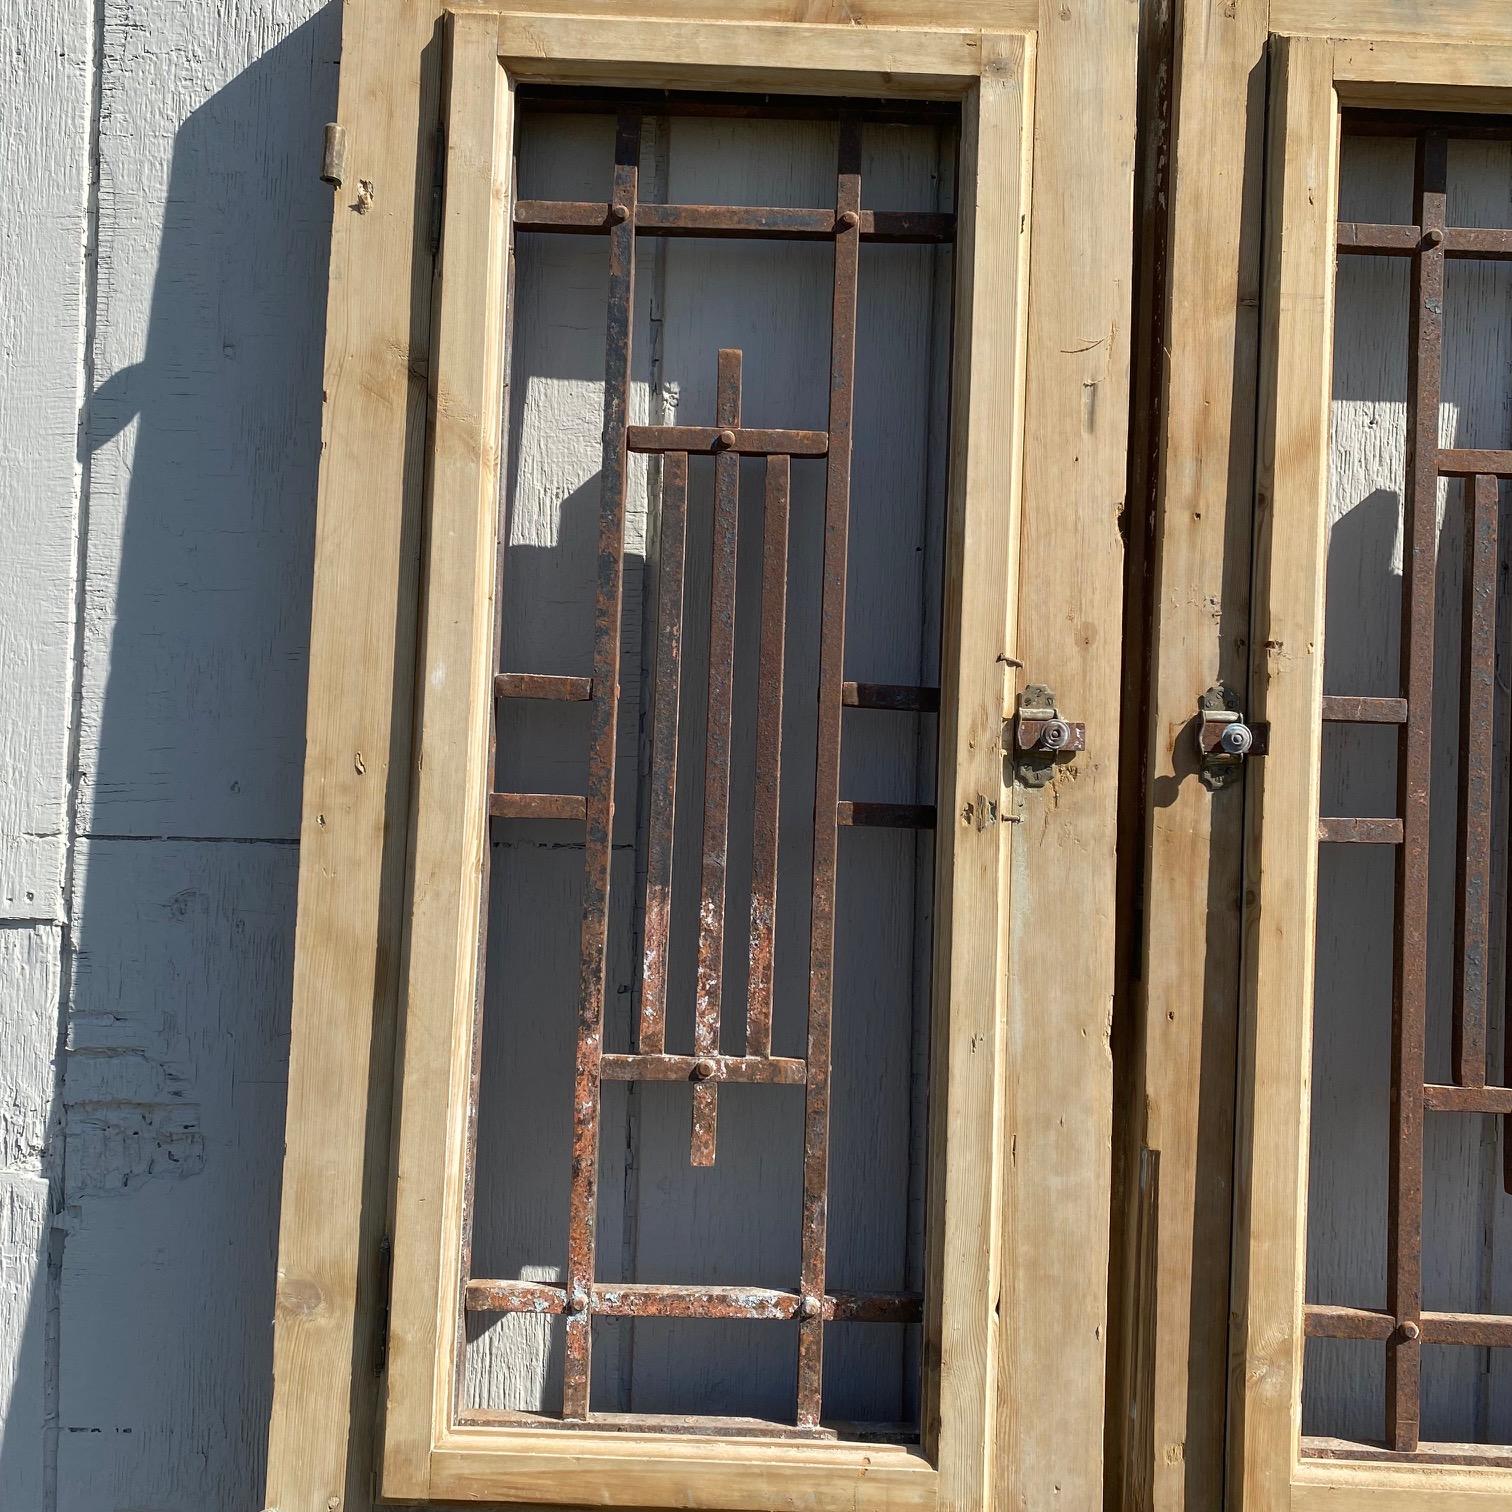 Pair of stunning stripped 19th century French doors with wrought iron, featuring bold molded detail framing the lower panels as well as the intricate wrought iron inserts, which open, above, which are artfully wrought in a beautiful geometric